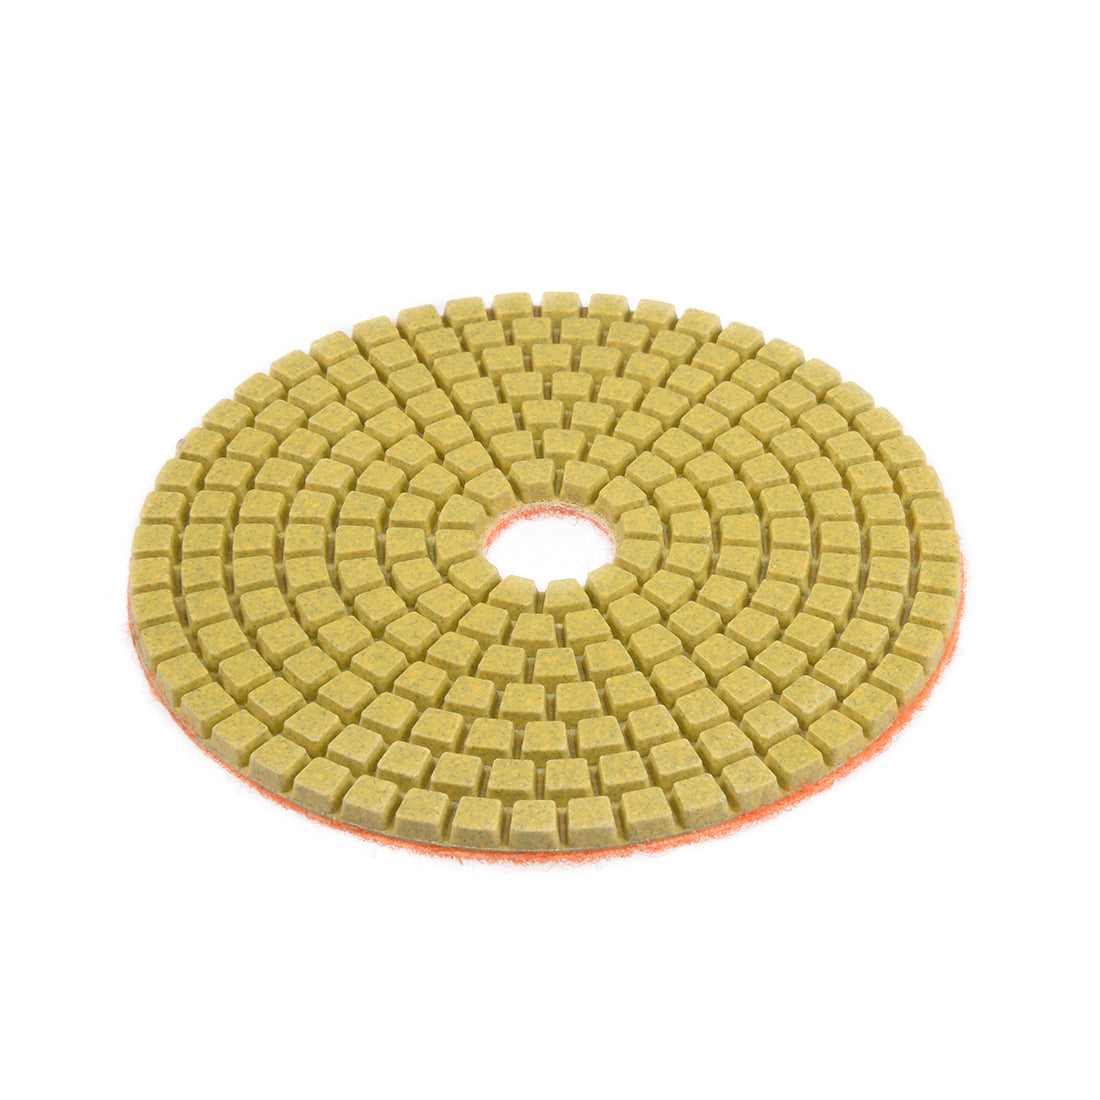 uxcell Uxcell Diamond Polishing Sanding Grinding Pads Discs 4 Inch Grit 300 1 Pcs for Granite Concrete Stone Marble